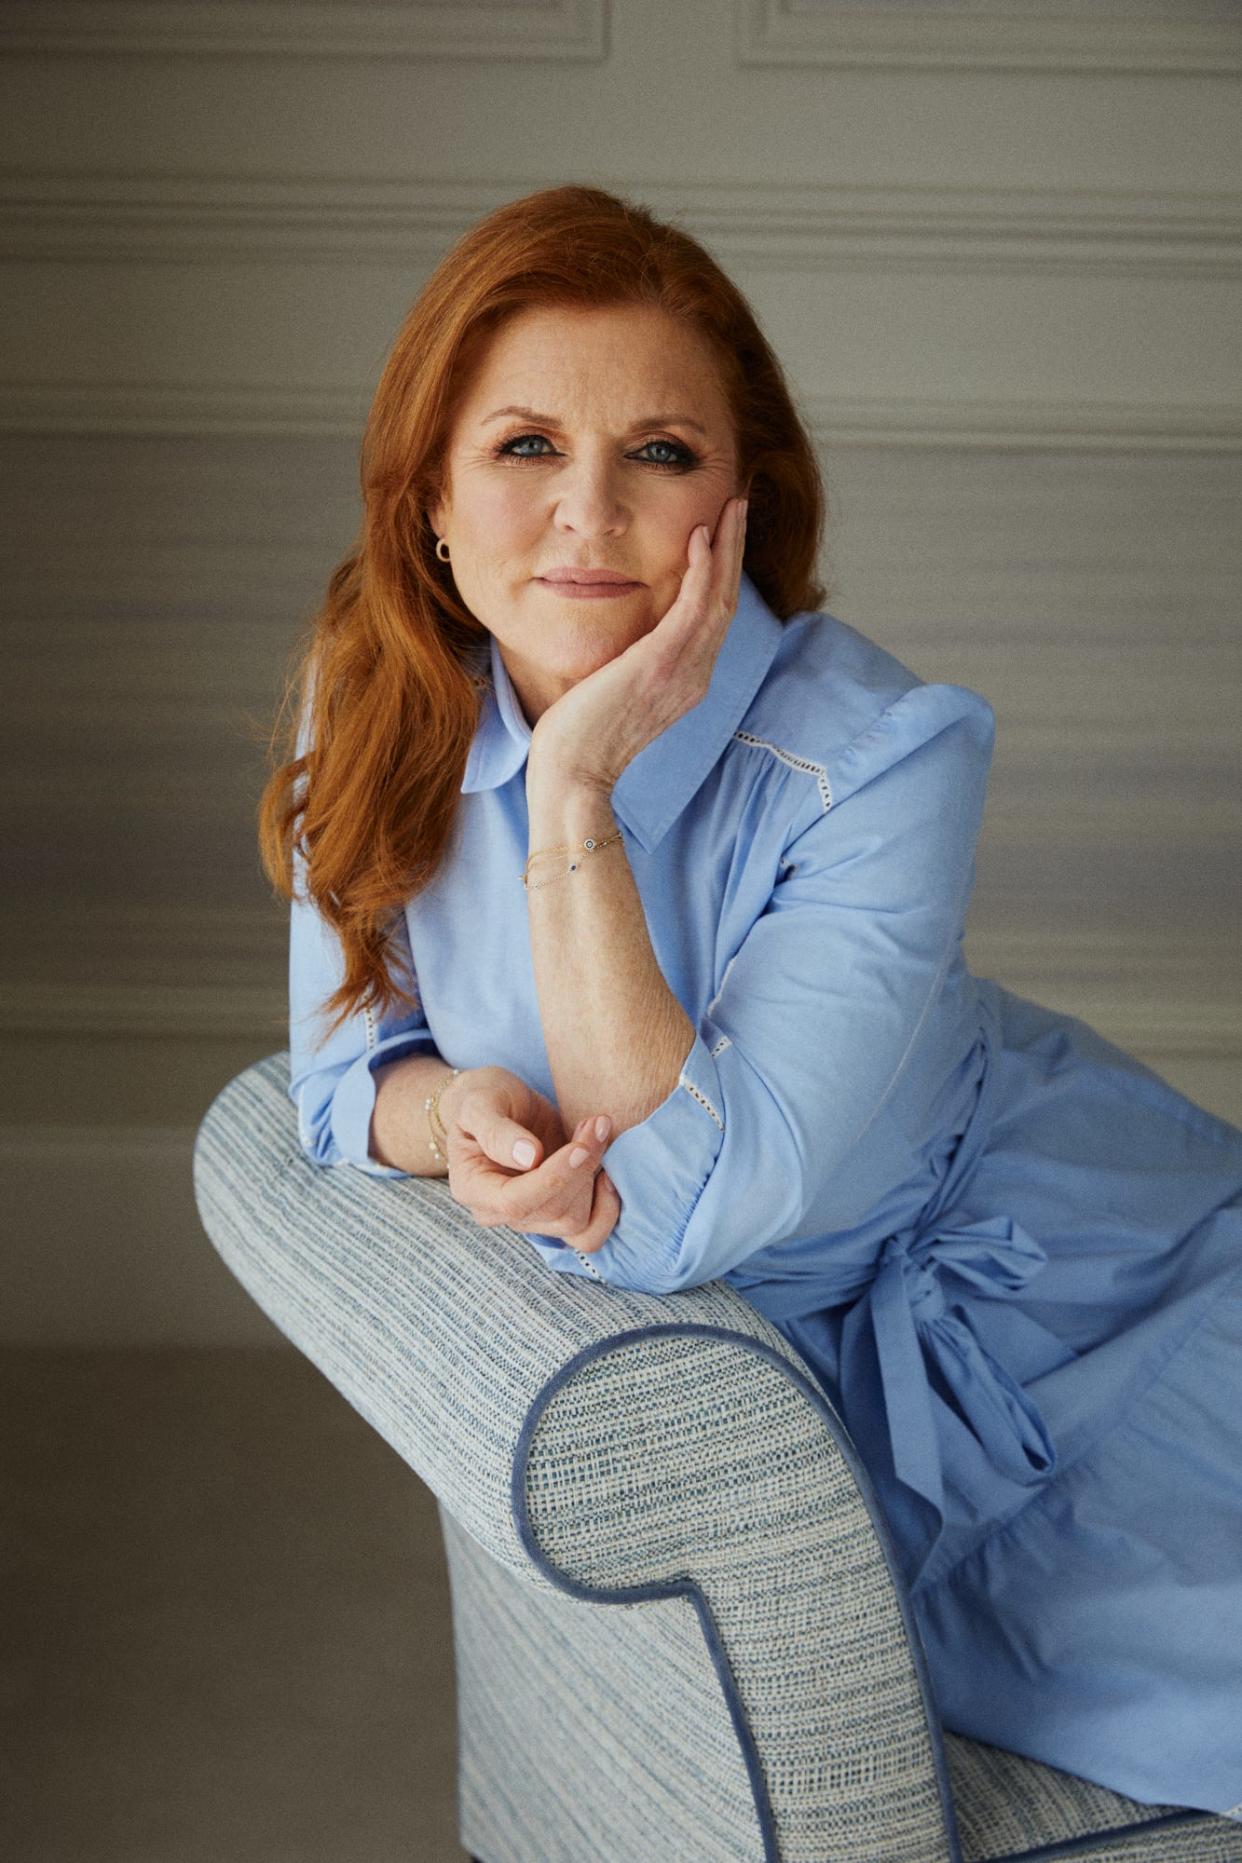 Sarah Ferguson, Duchess of York, will speak Feb. 7 at the "Shop the Day Away" luncheon of the Cancer Alliance of Help & Hope. The event is at 10 a.m. at The Breakers.